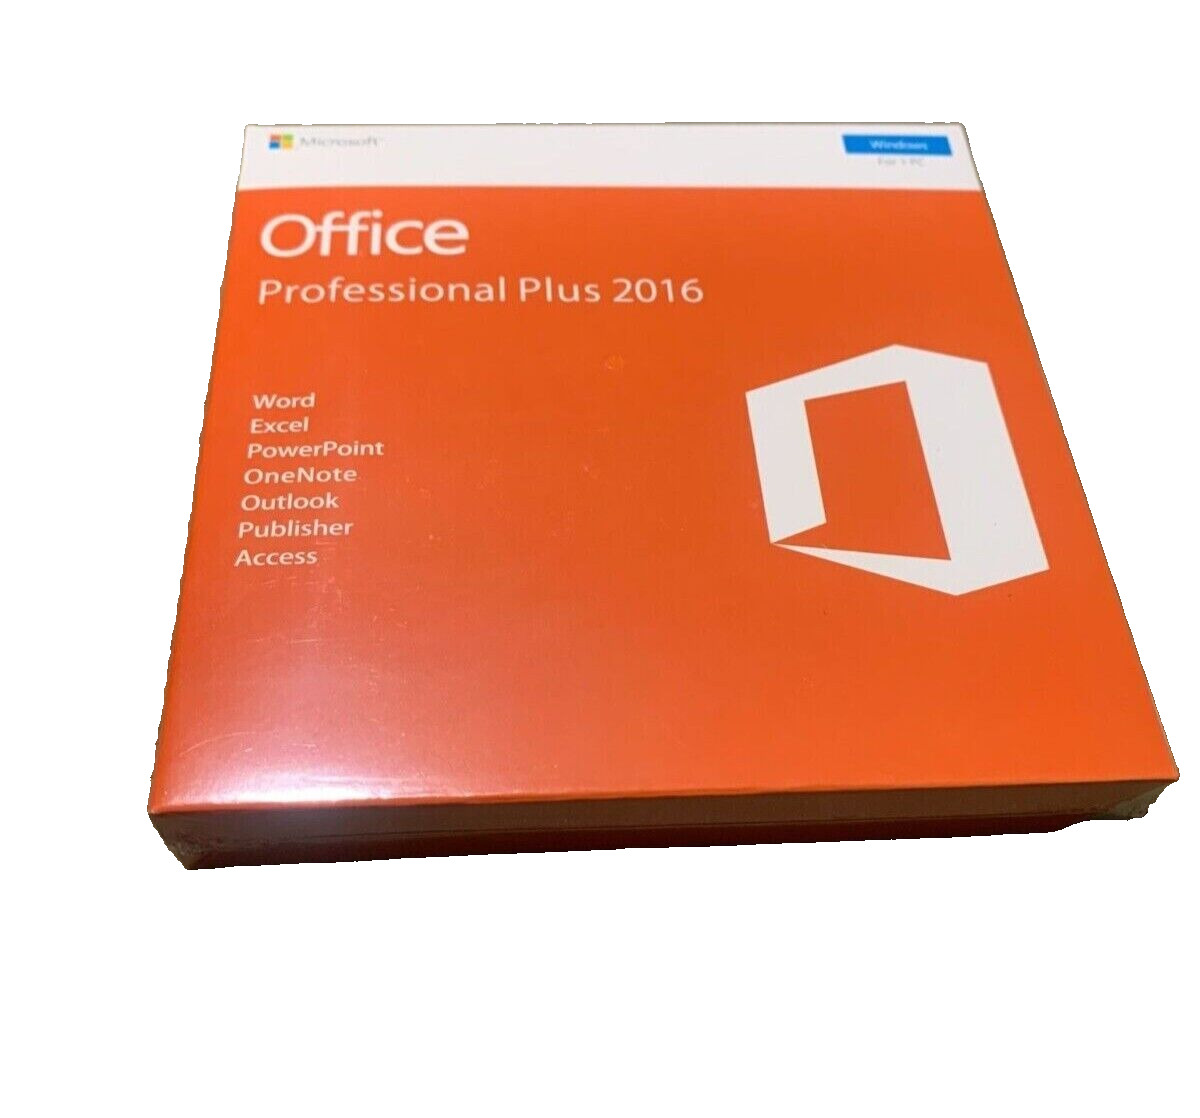 Microsoft Office 2016 Professional Plus DVD Sealed Retail Package /w Product Key